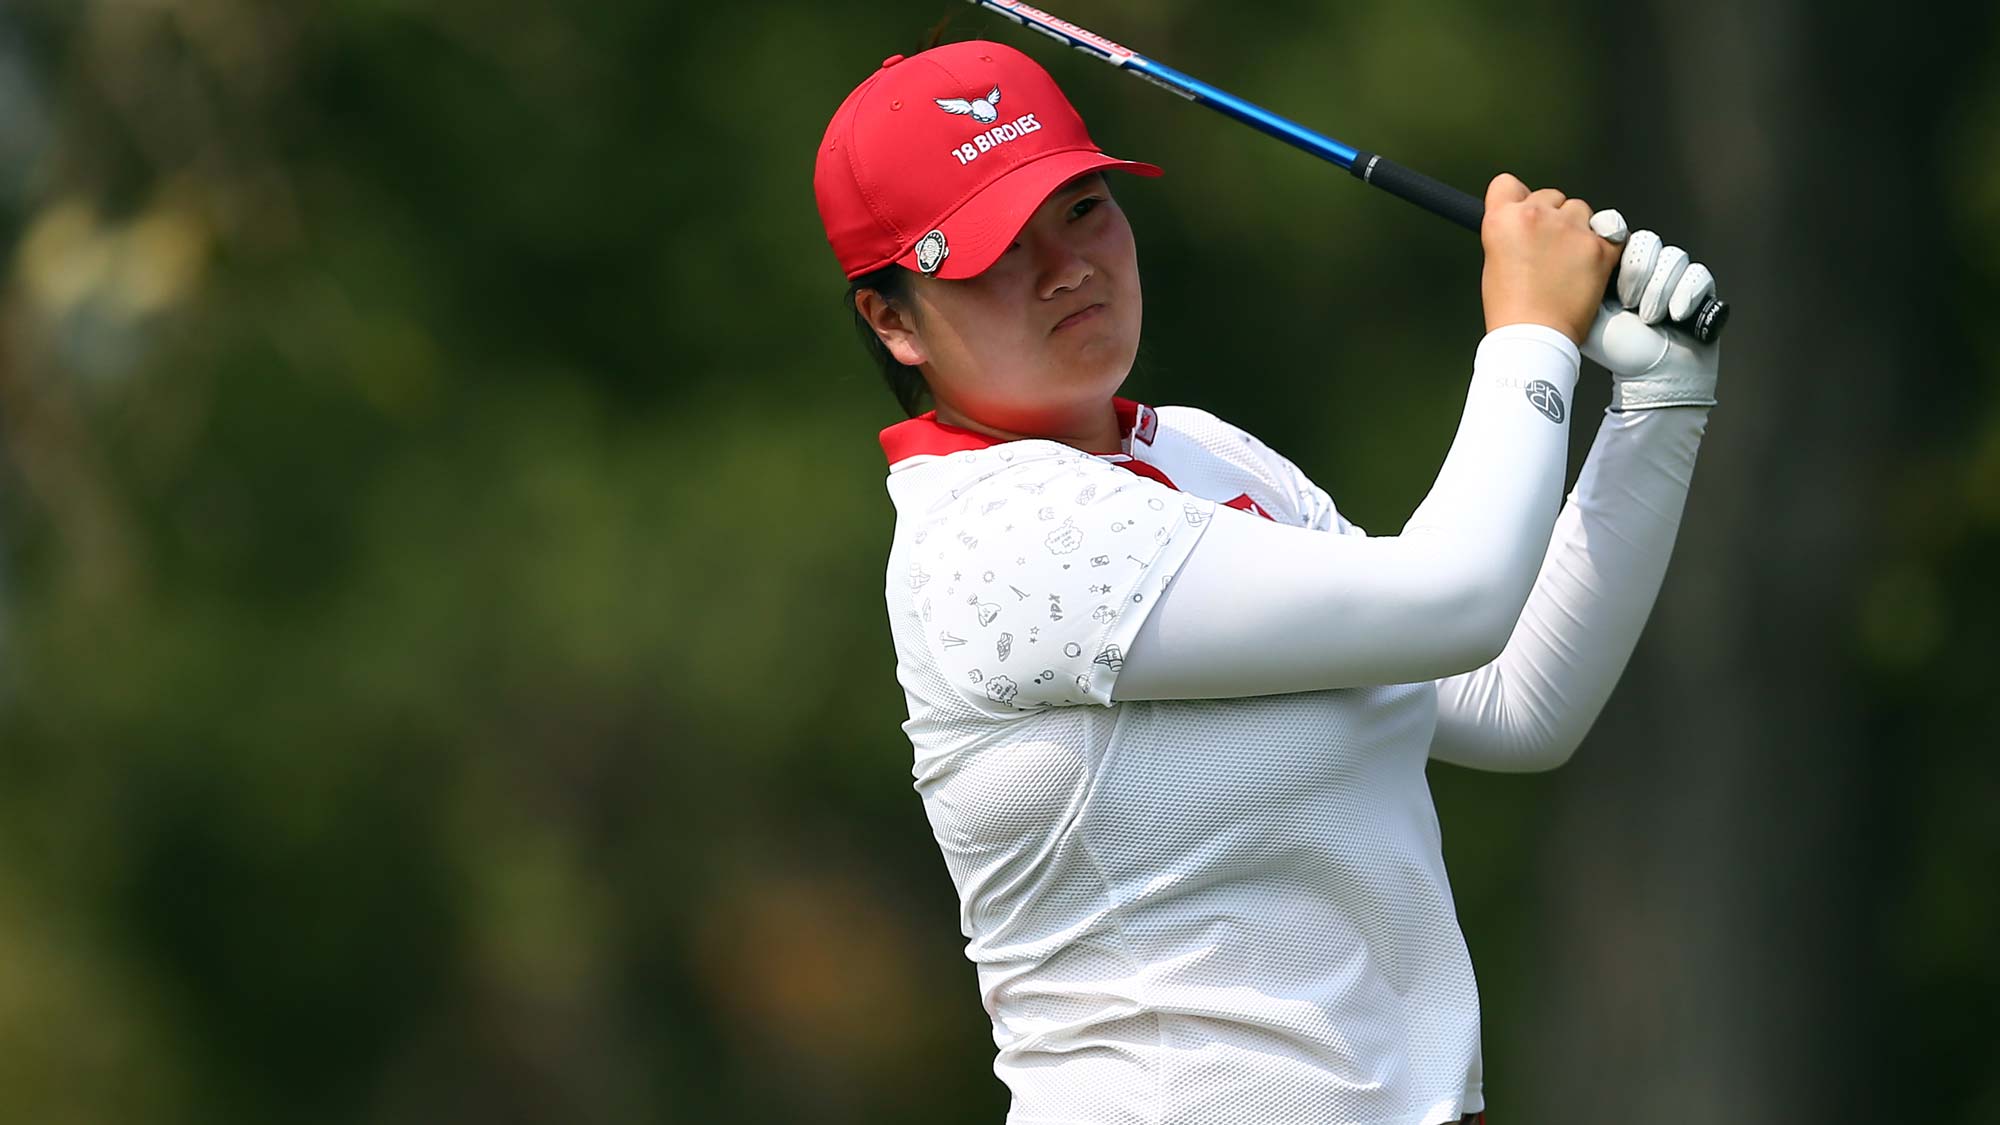 Angel Yin of the United States hits her tee shot on the 9th hole during the second round of the CP Womens Open